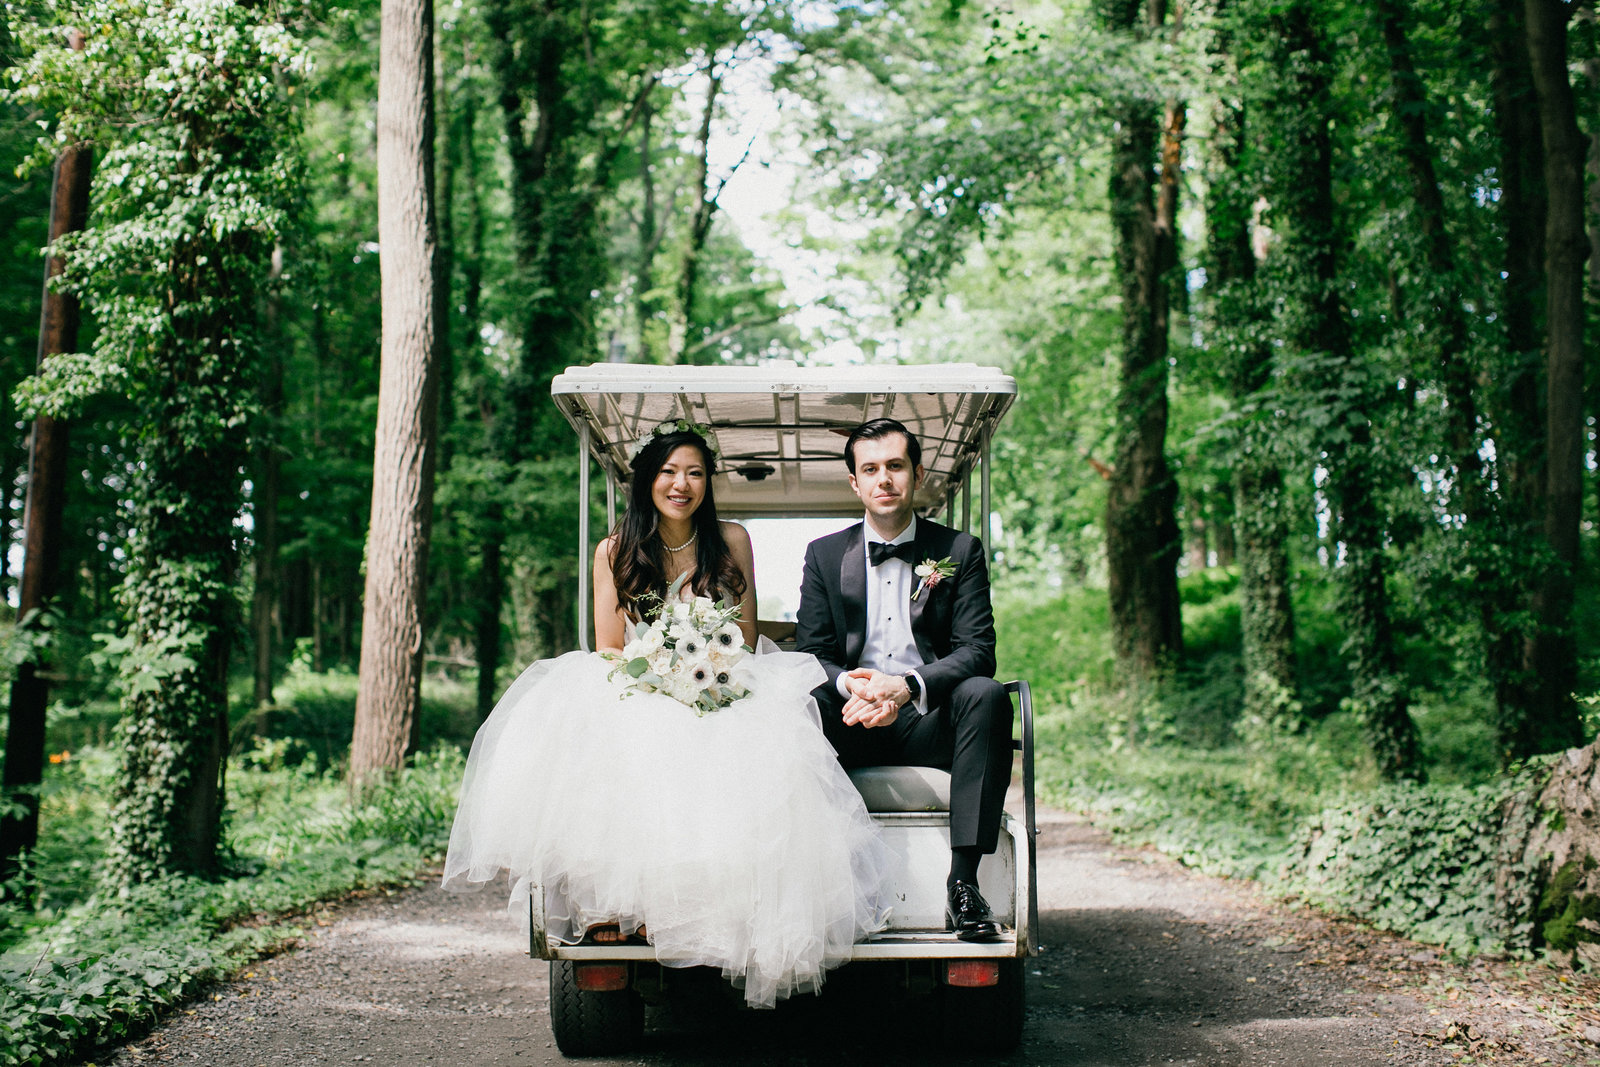 Bride and groom shared a golf cart ride to all the locations on the property of this wedding venue.